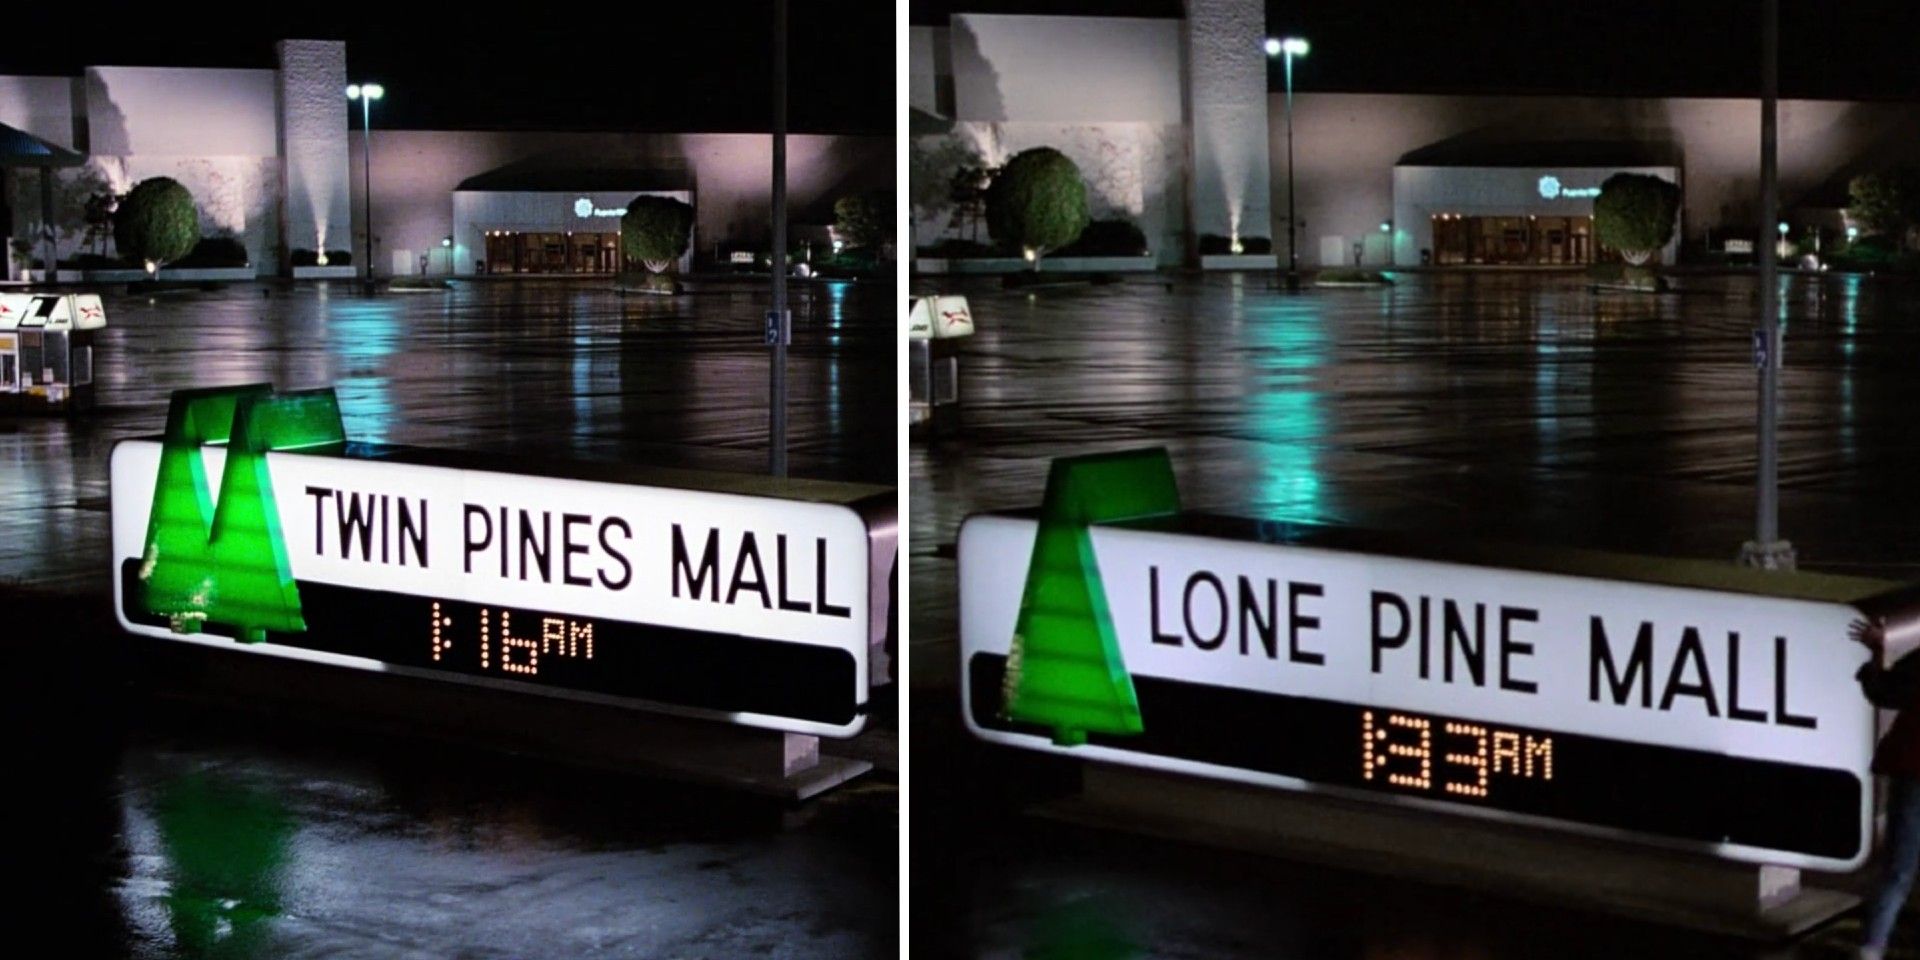 Twin Pines Mall to Lone Pine Mall in Back to the Future